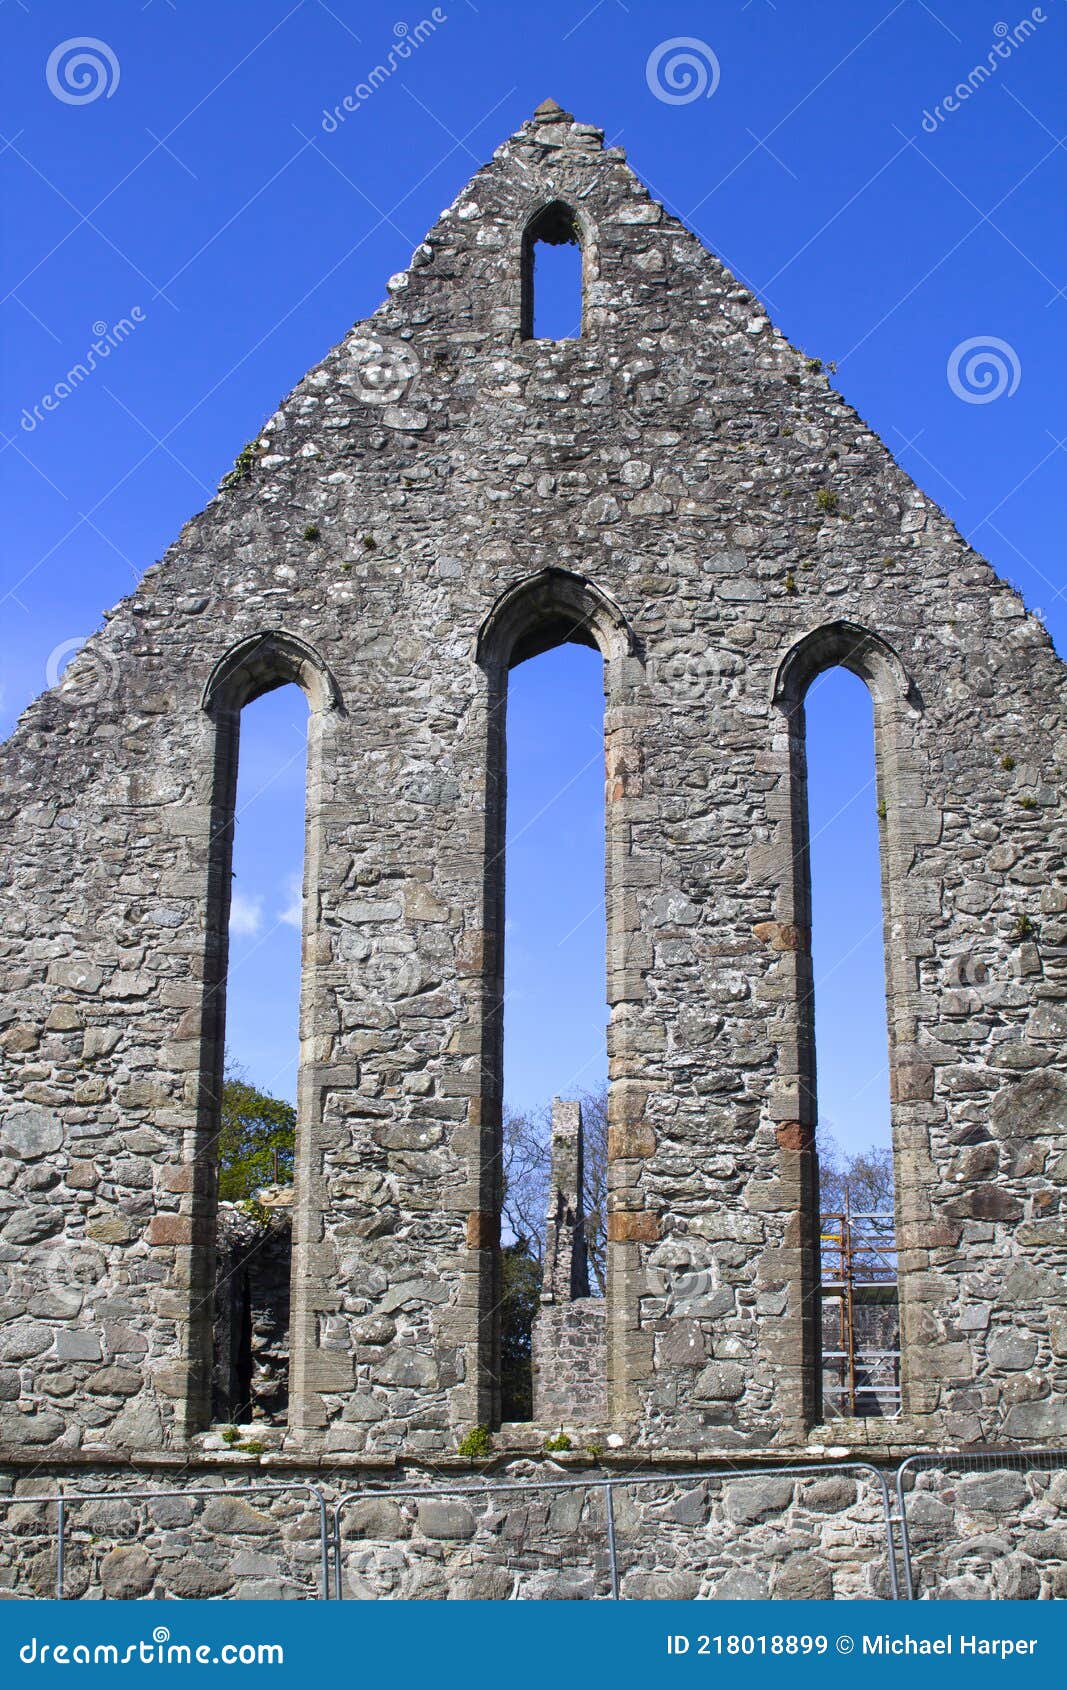 part of the ruins of the historic greyabbey monastery